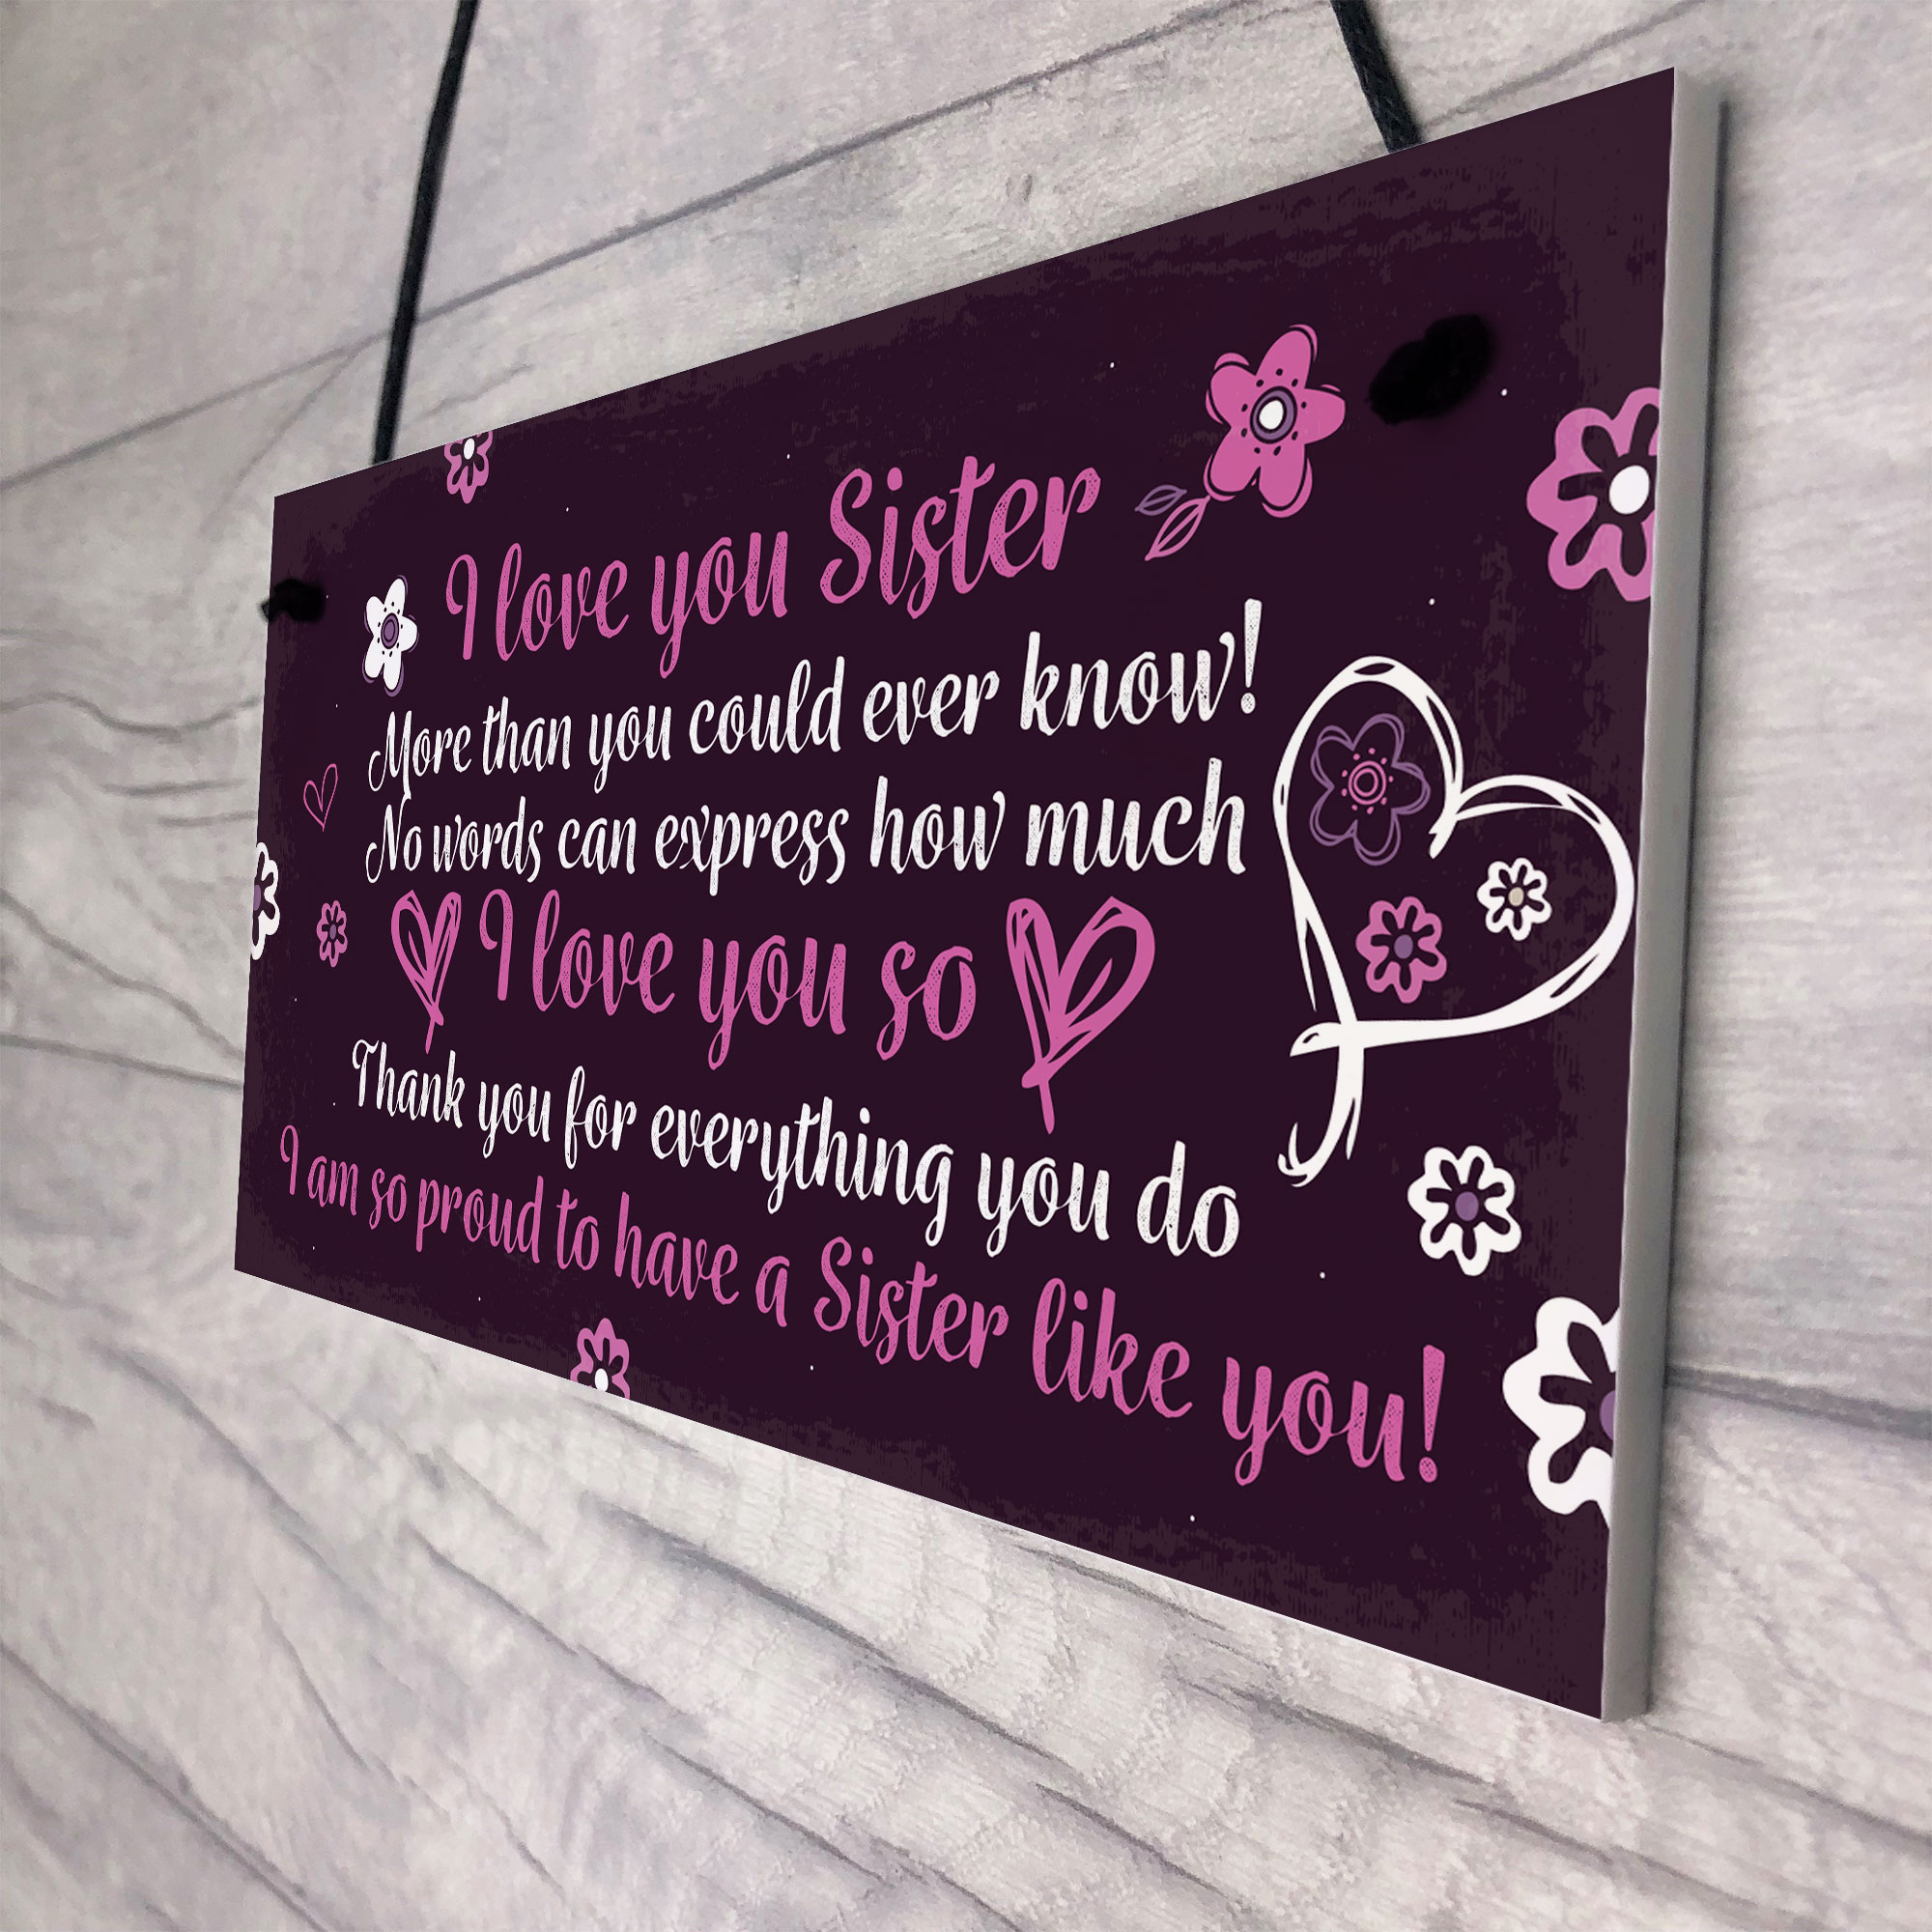 Birthday Christmas Gifts For Sister Keepsake Hanging Plaque Love You THANK YOU 5056293508209 | eBay